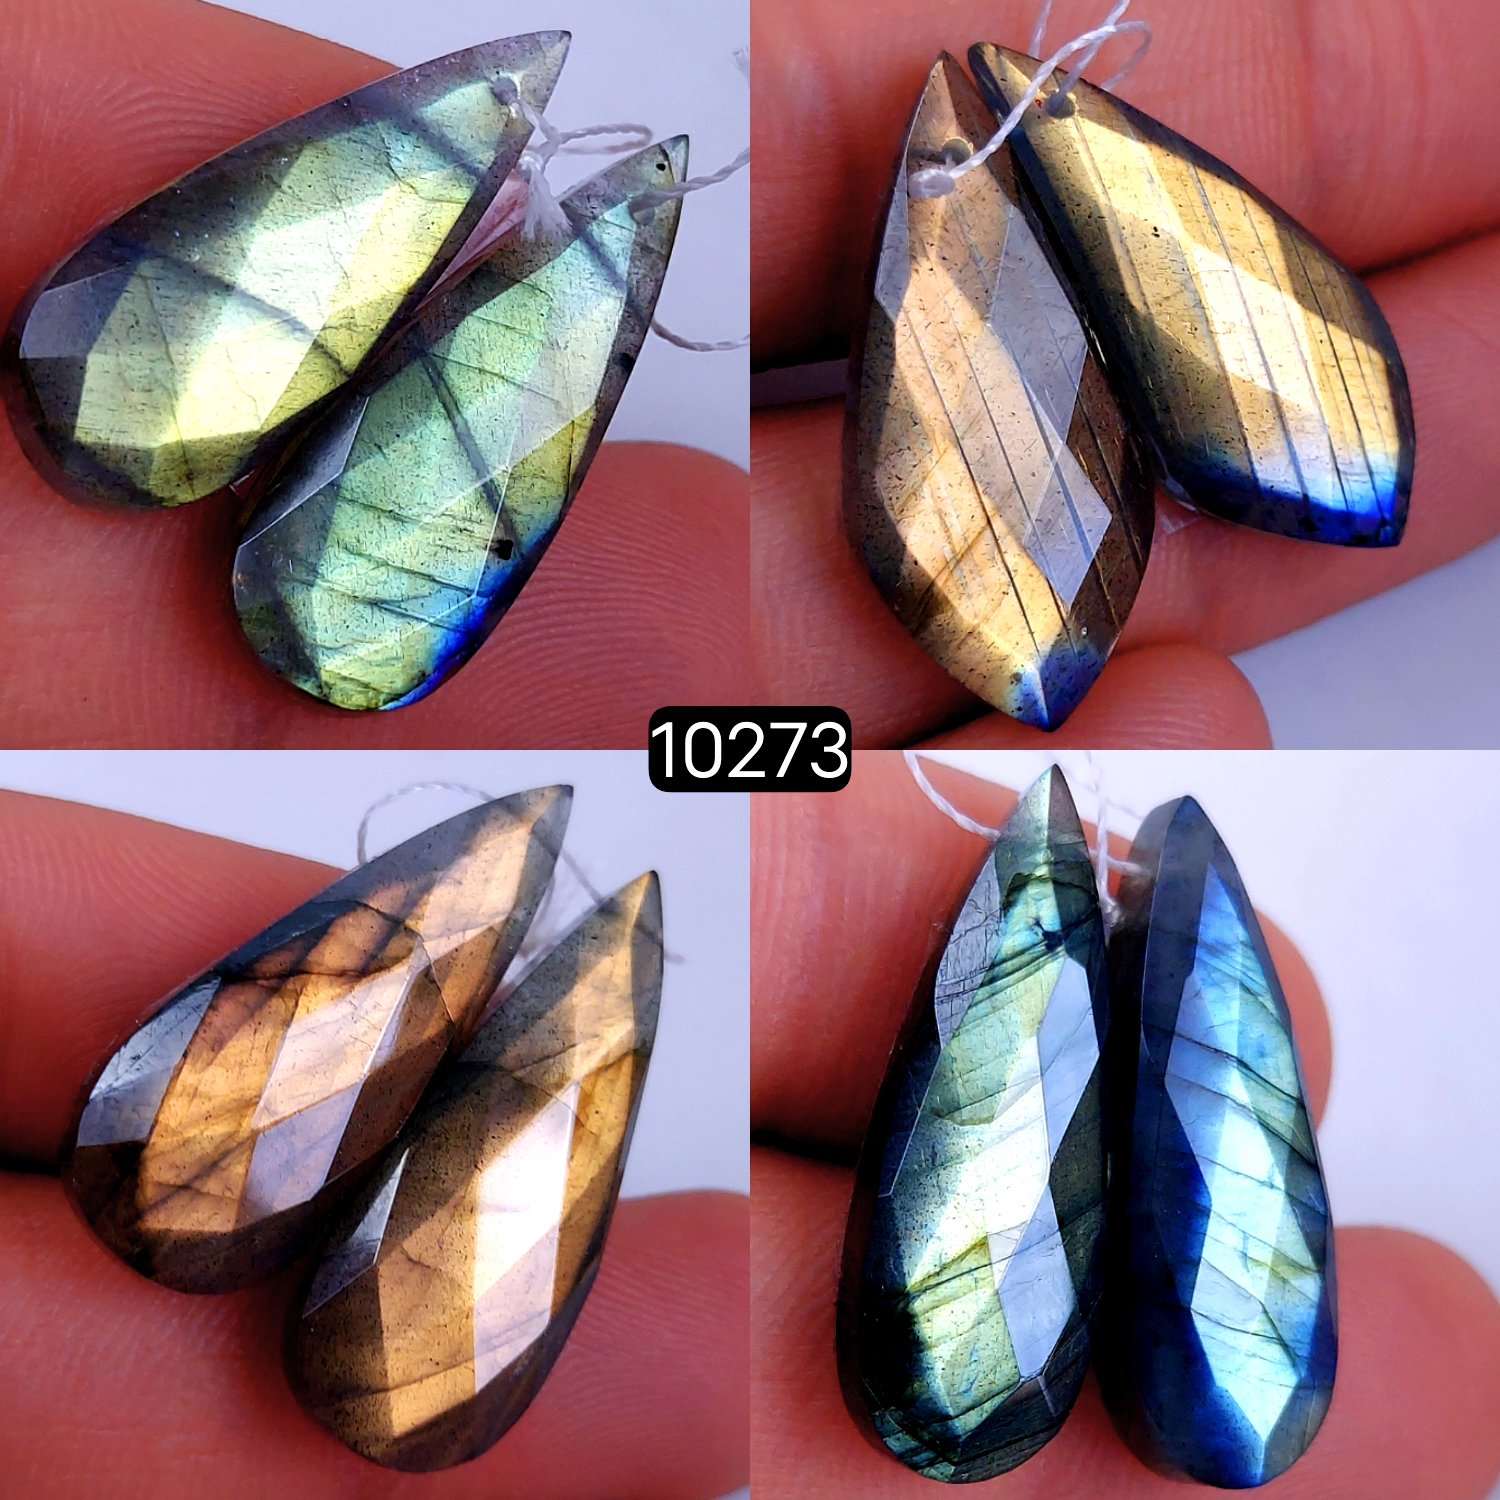 4Pair 102Cts Natural Labradorite Faceted Crystal Drill Dangle Drop Earring Pairs Silver Earrings Rose cut Labradorite Hoop Jewelry  30X12 26X10mm #10273